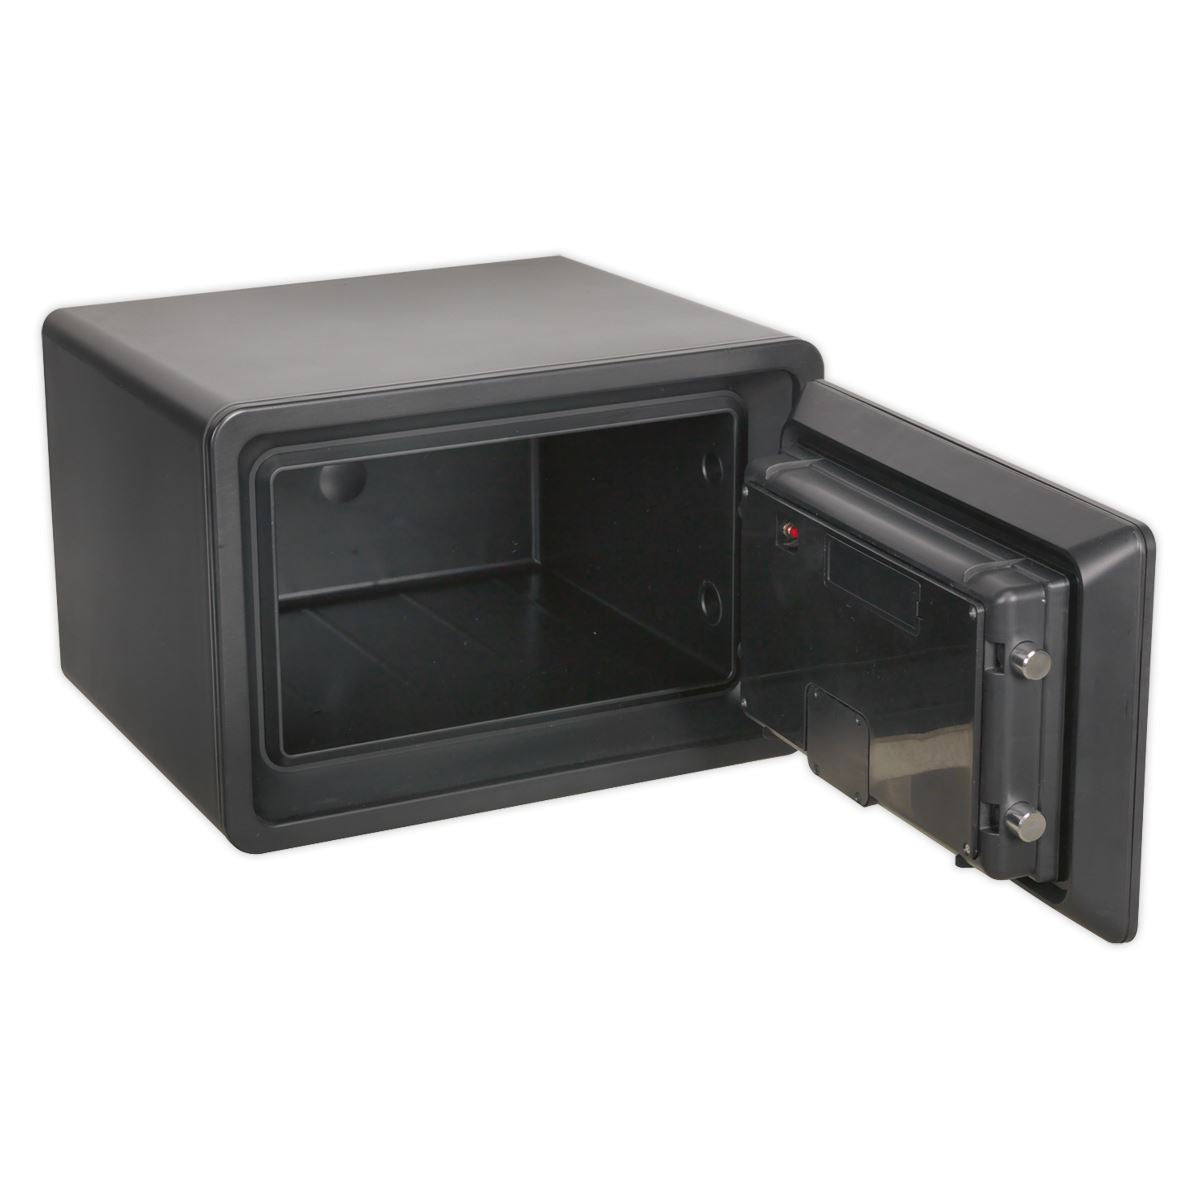 Sealey Electronic Combination Fireproof Safe 450 x 380 x 305mm